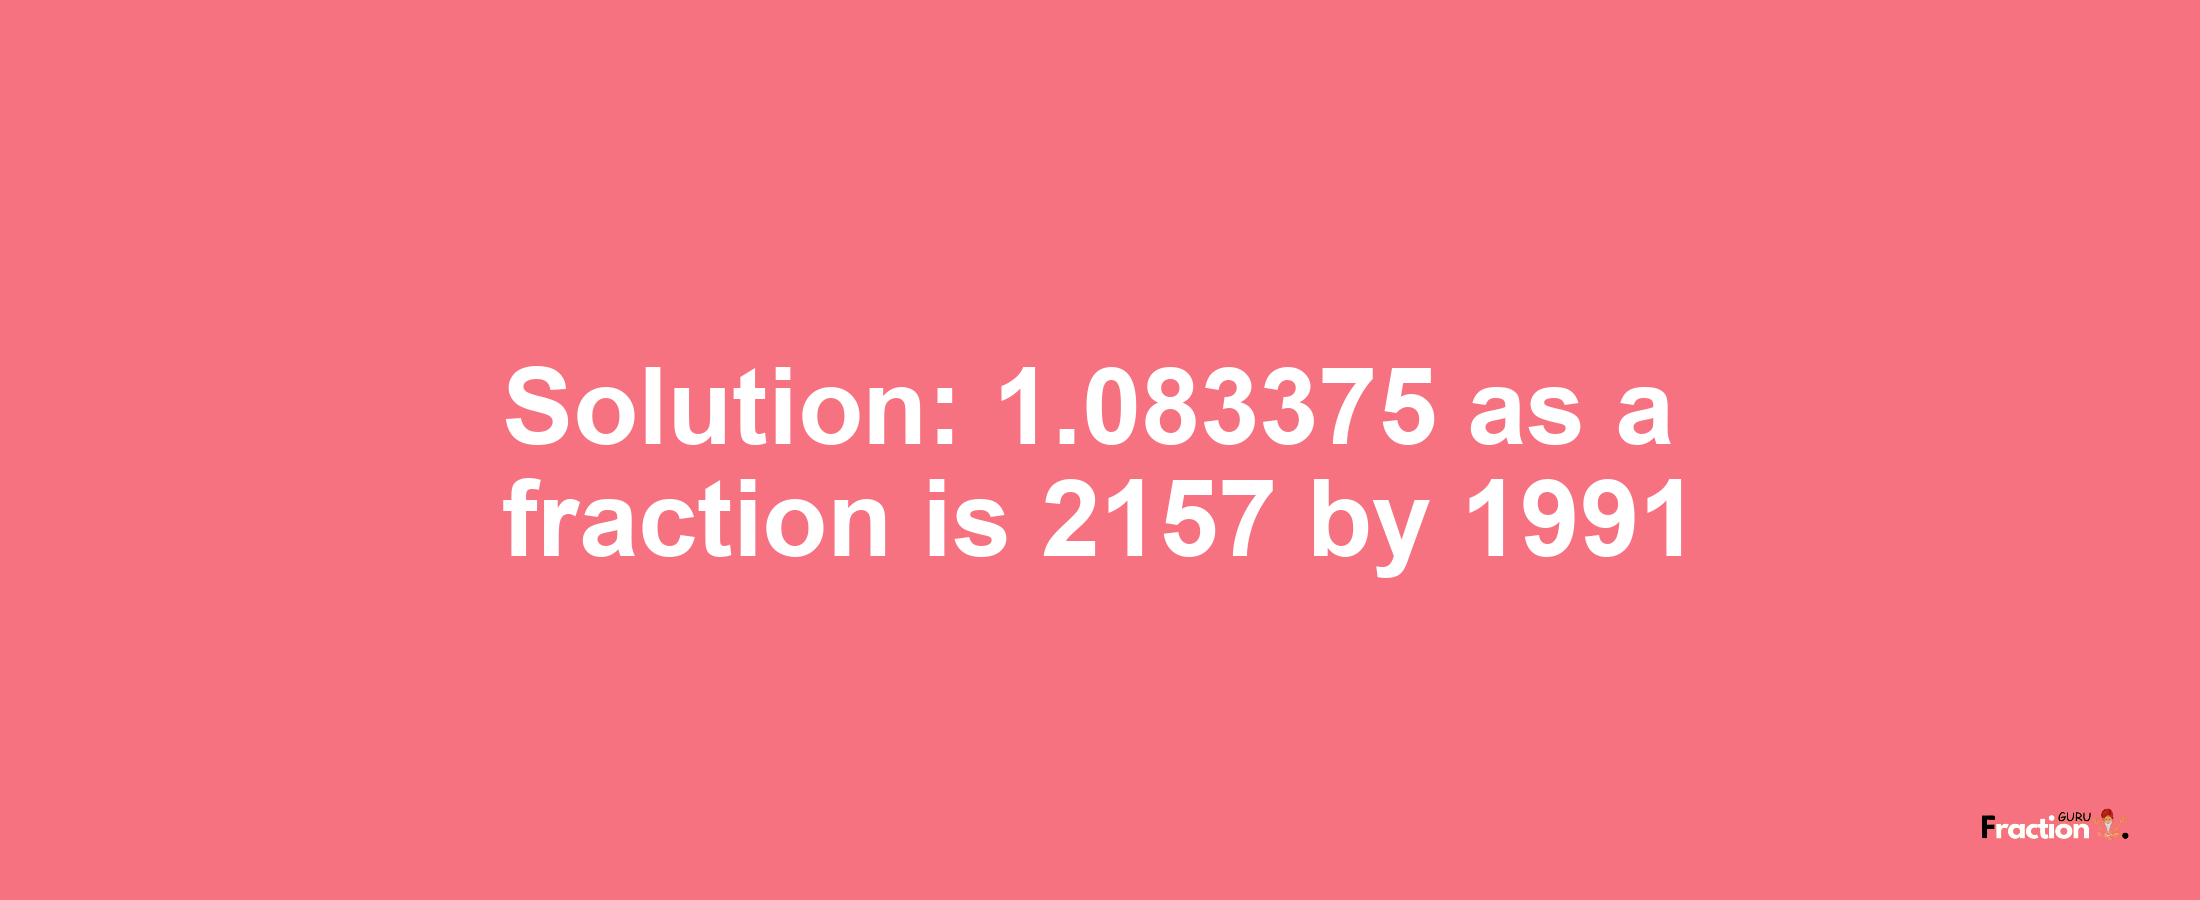 Solution:1.083375 as a fraction is 2157/1991